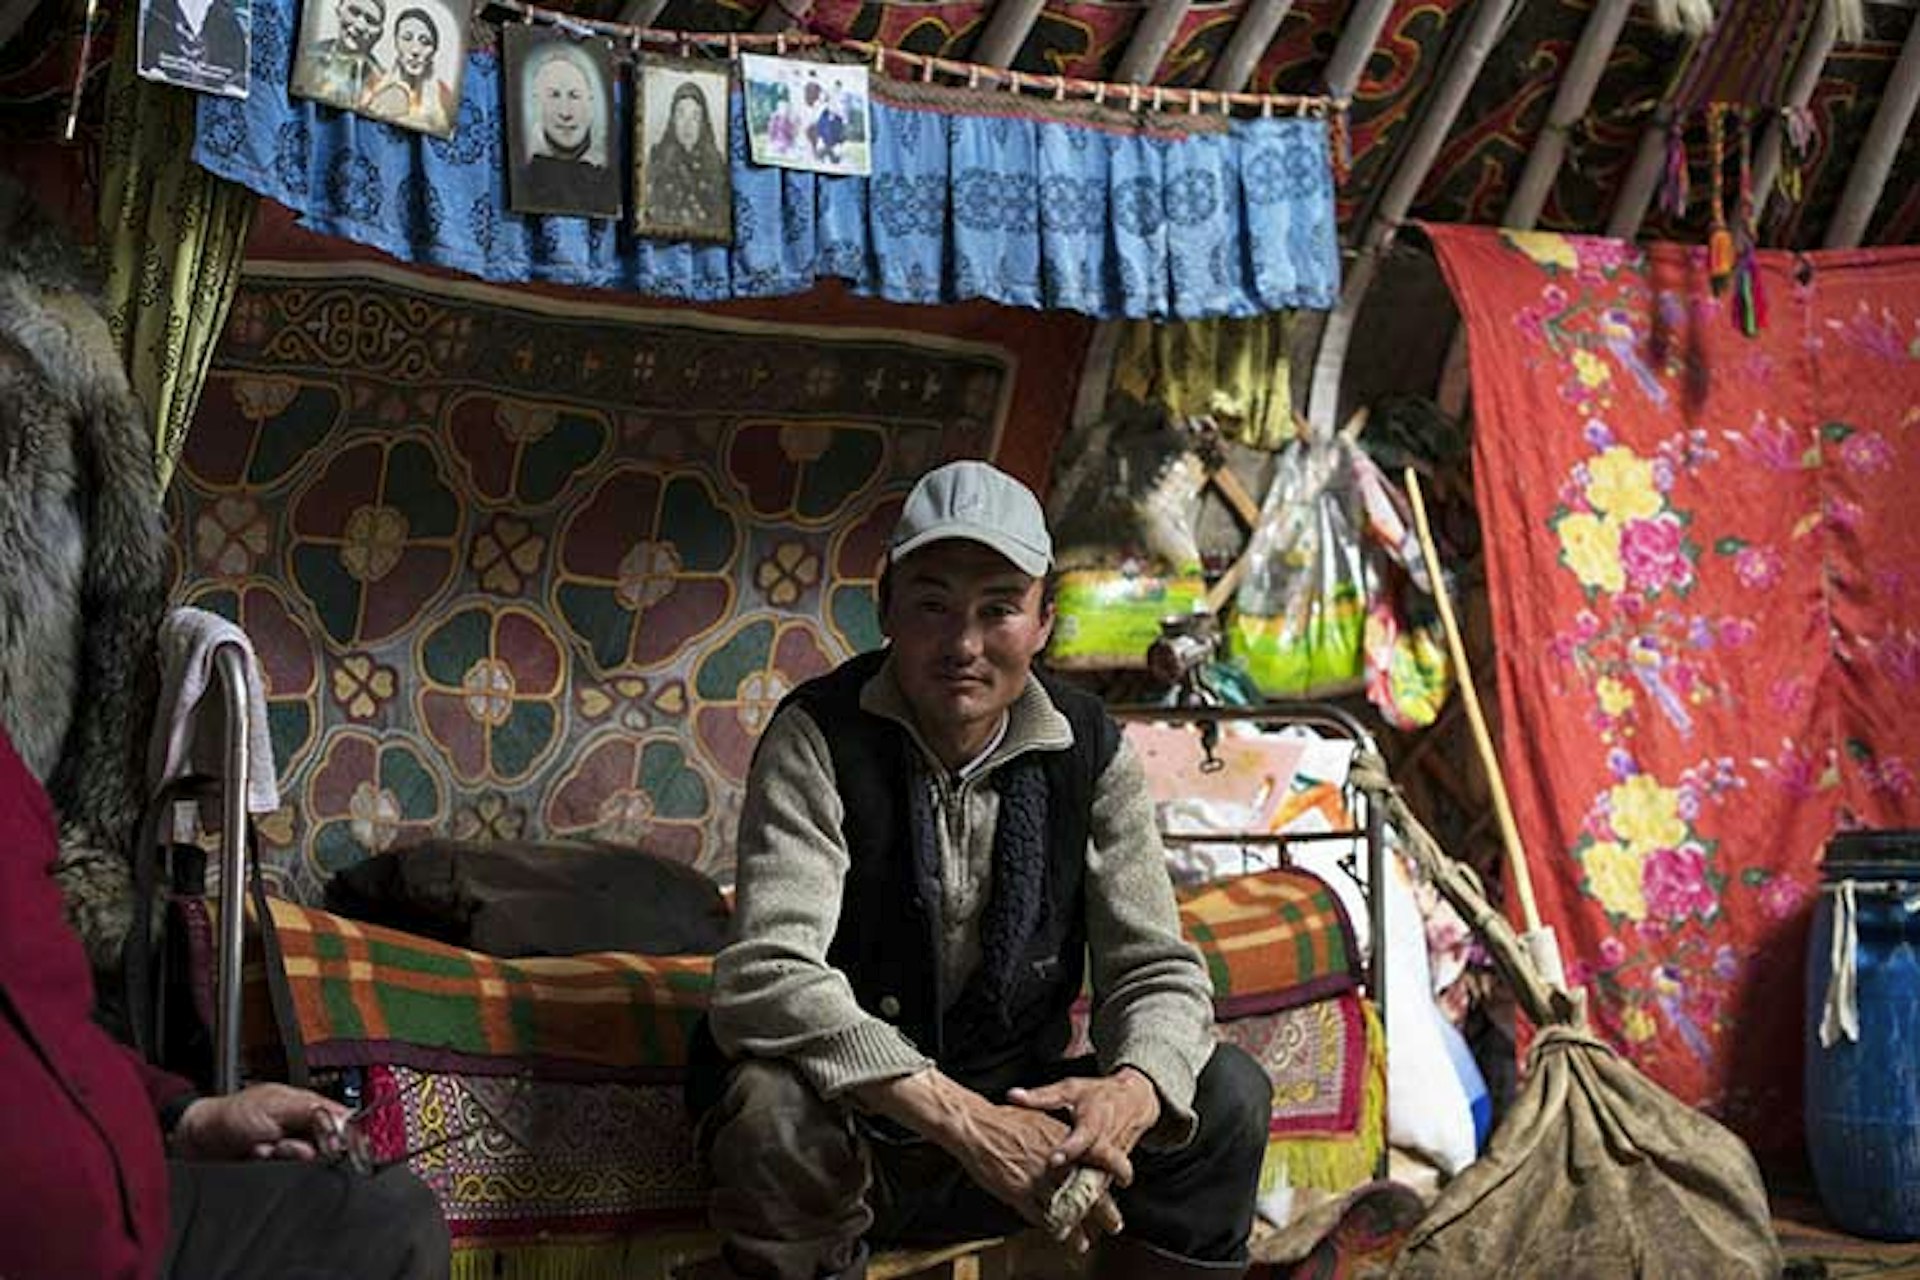 A nomad and his homey ger. Image by David Baxendale / Lonely Planet